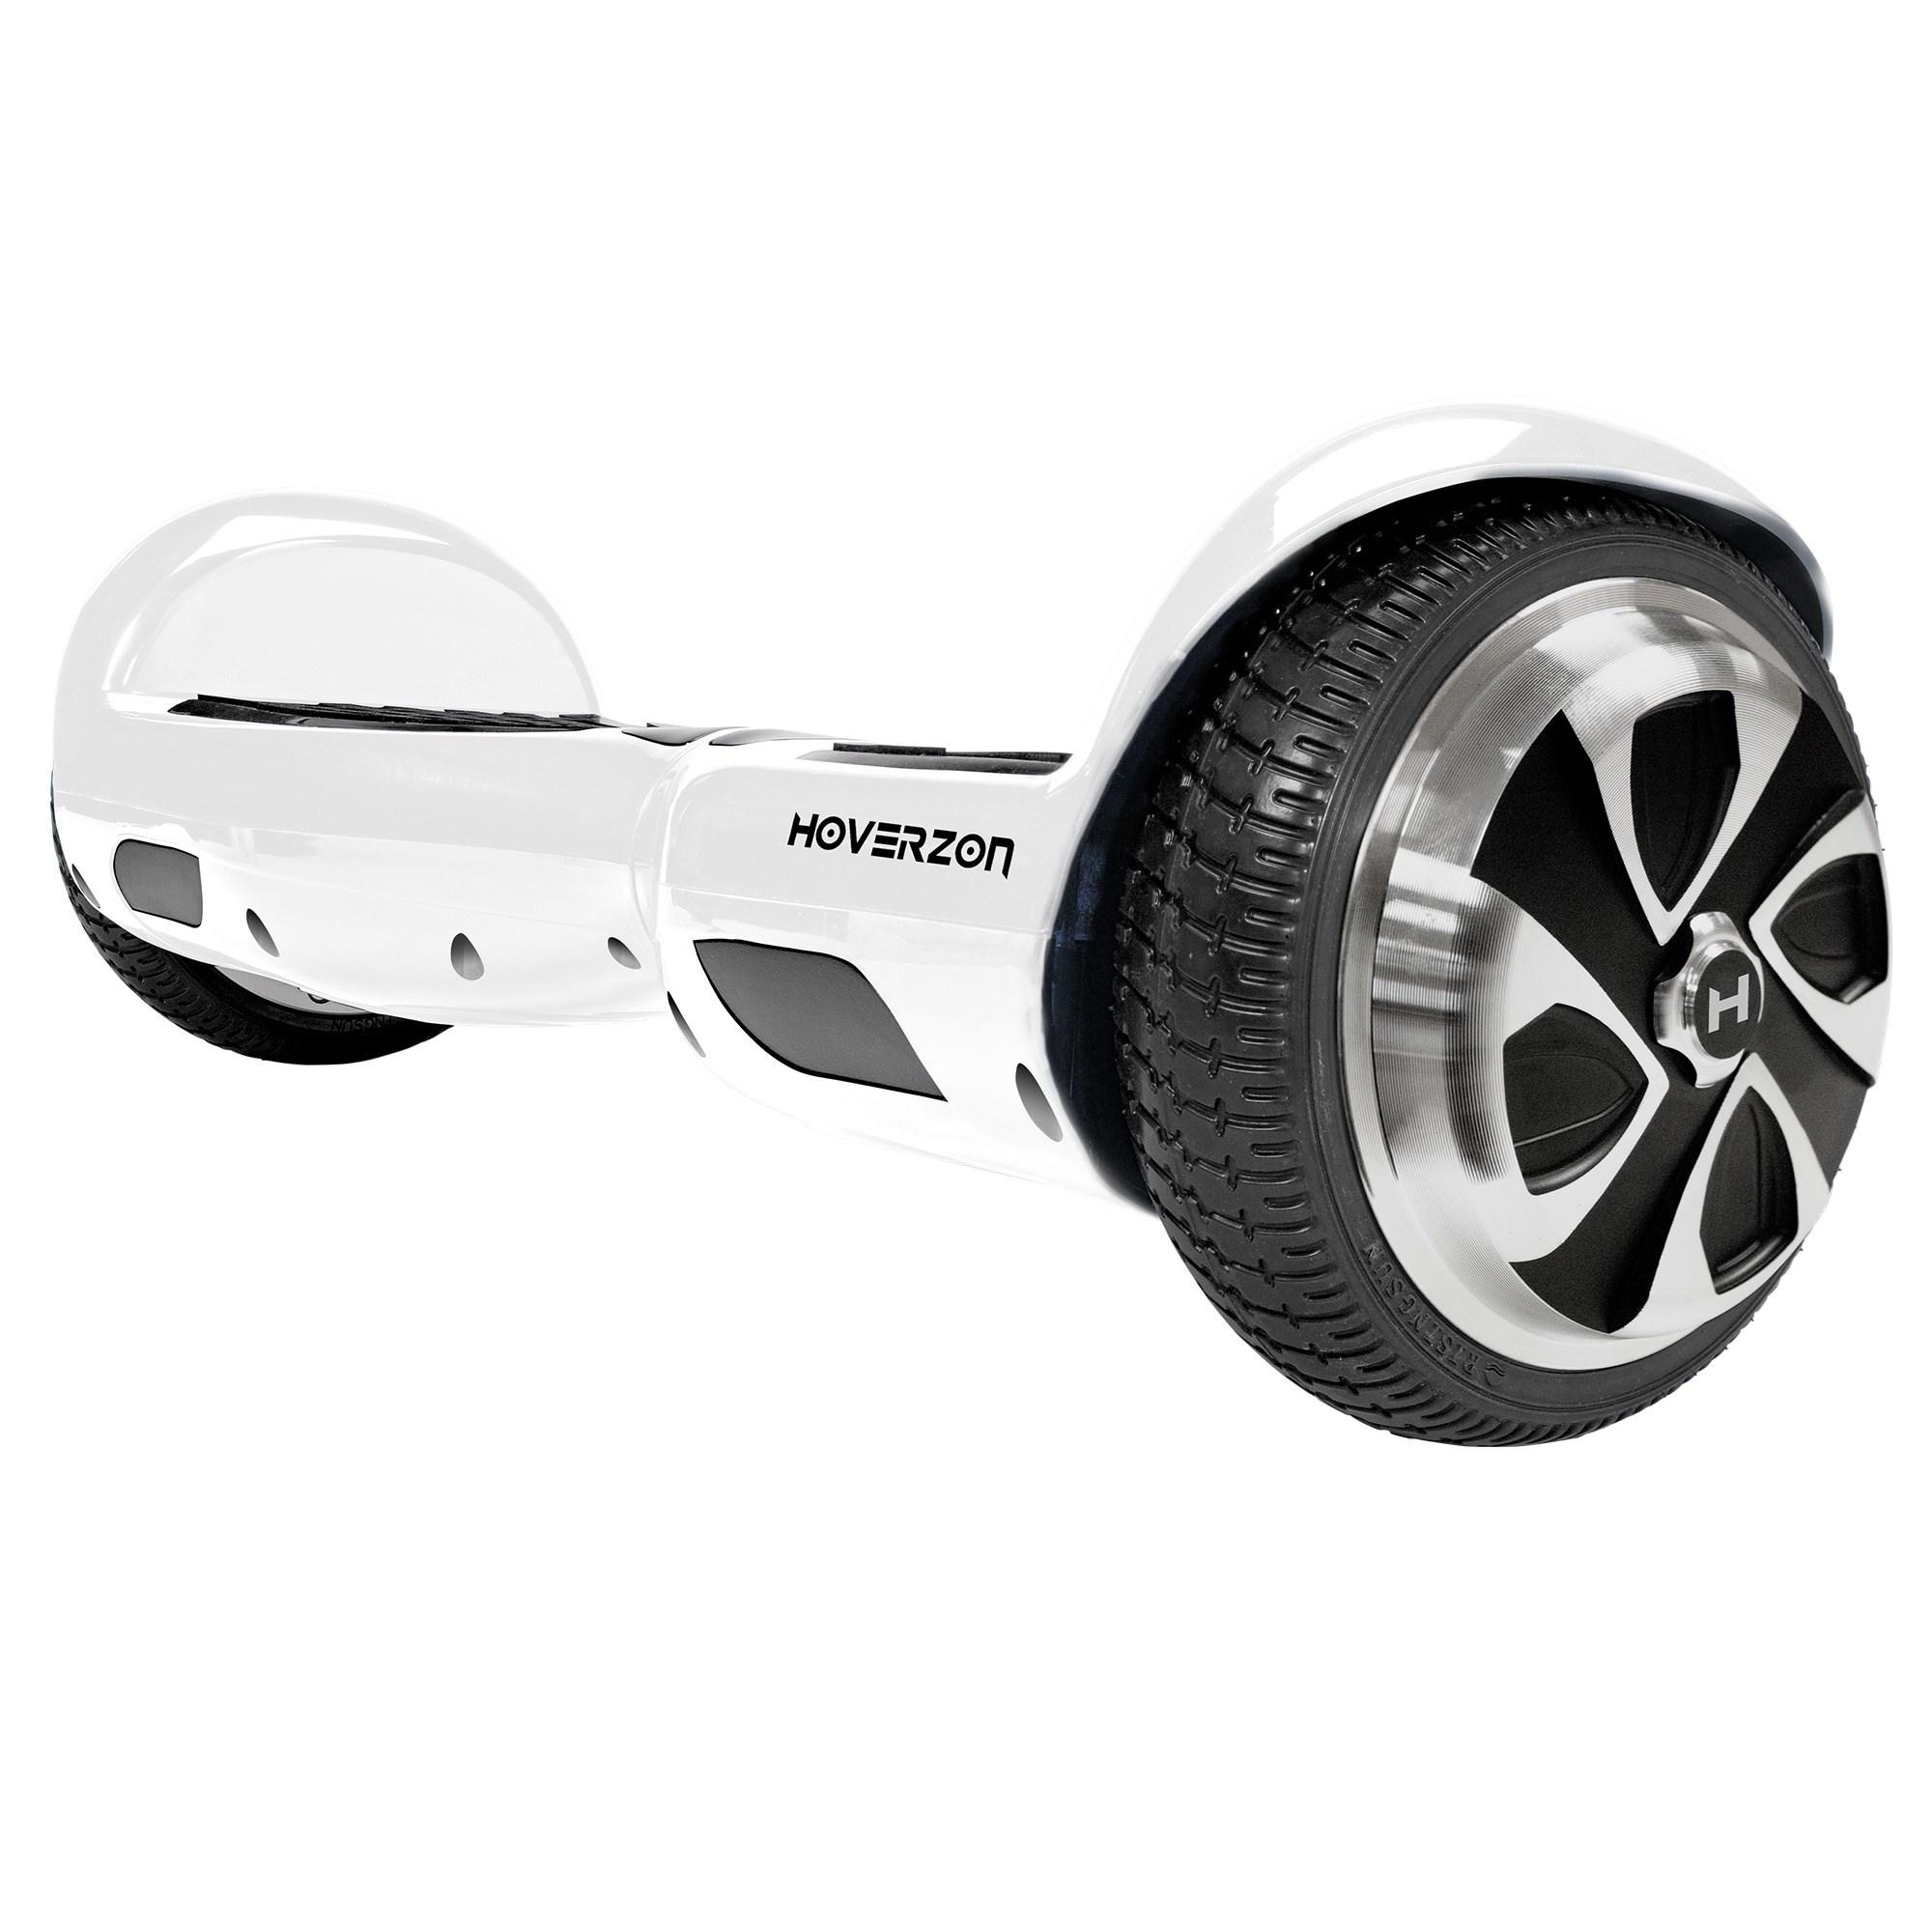 Hoverzone Hoverboard S - white